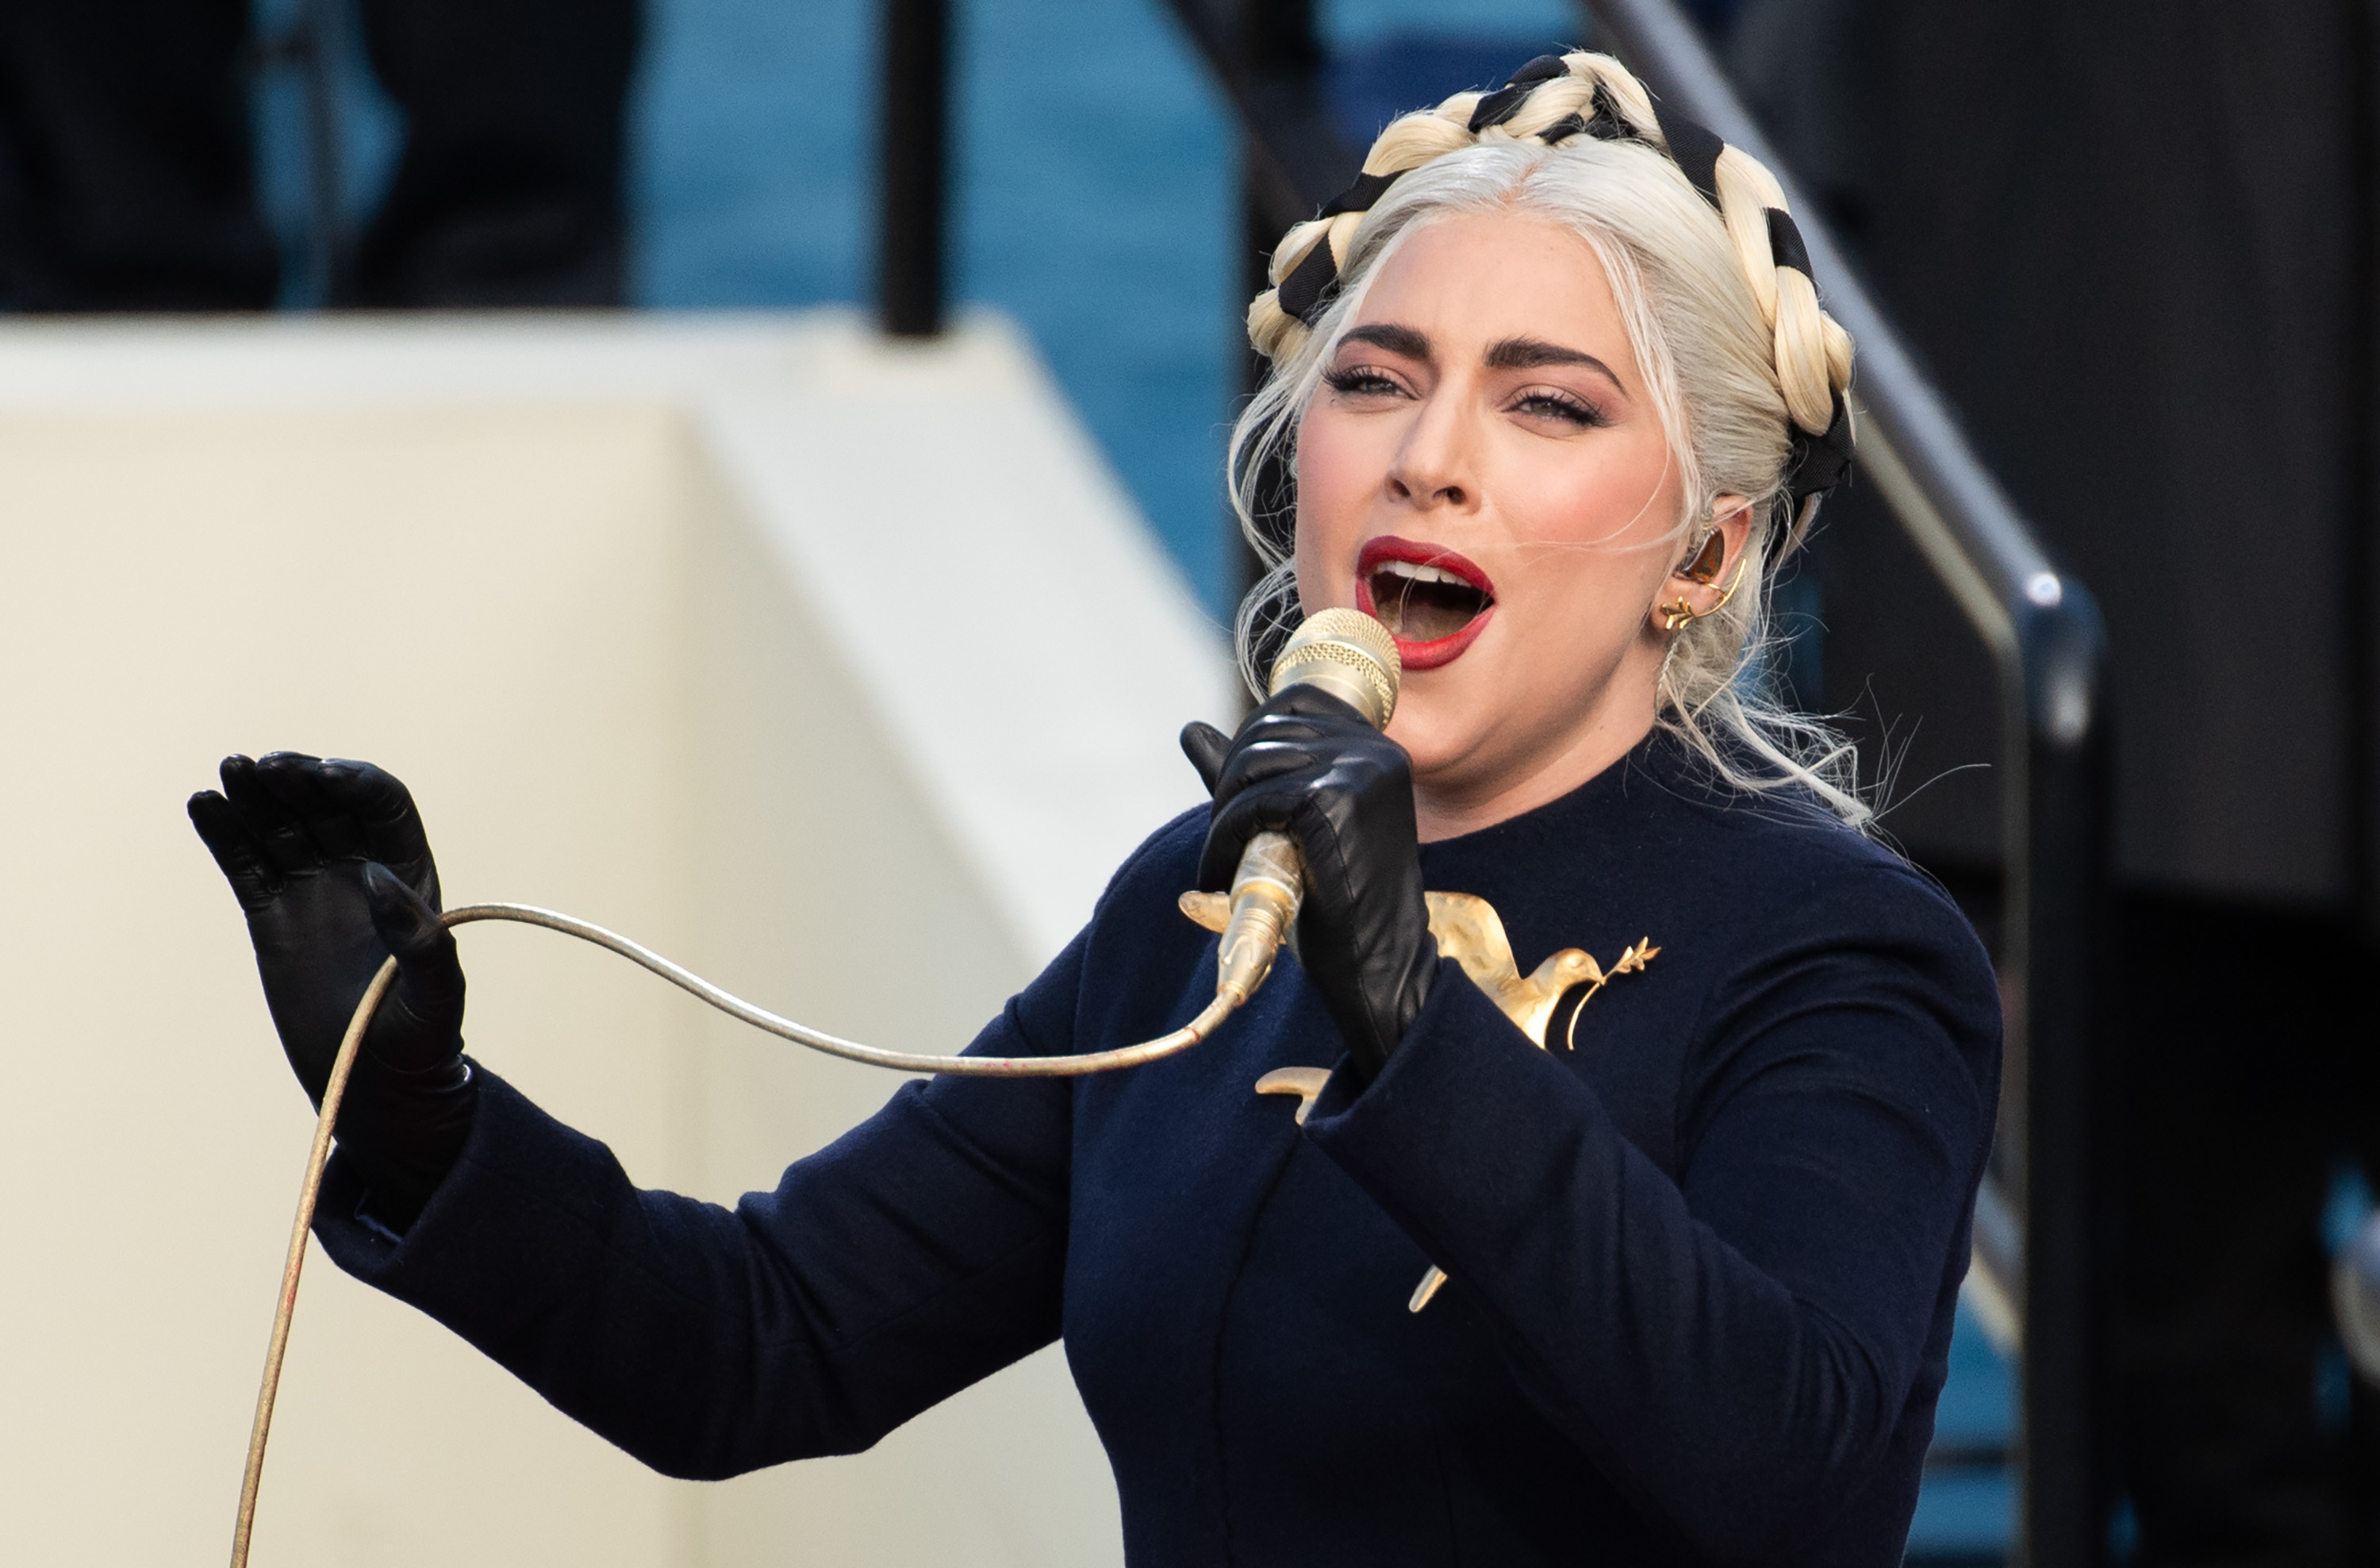 Inauguration 2021: Watch All the Performances from Lady Gaga, Foo